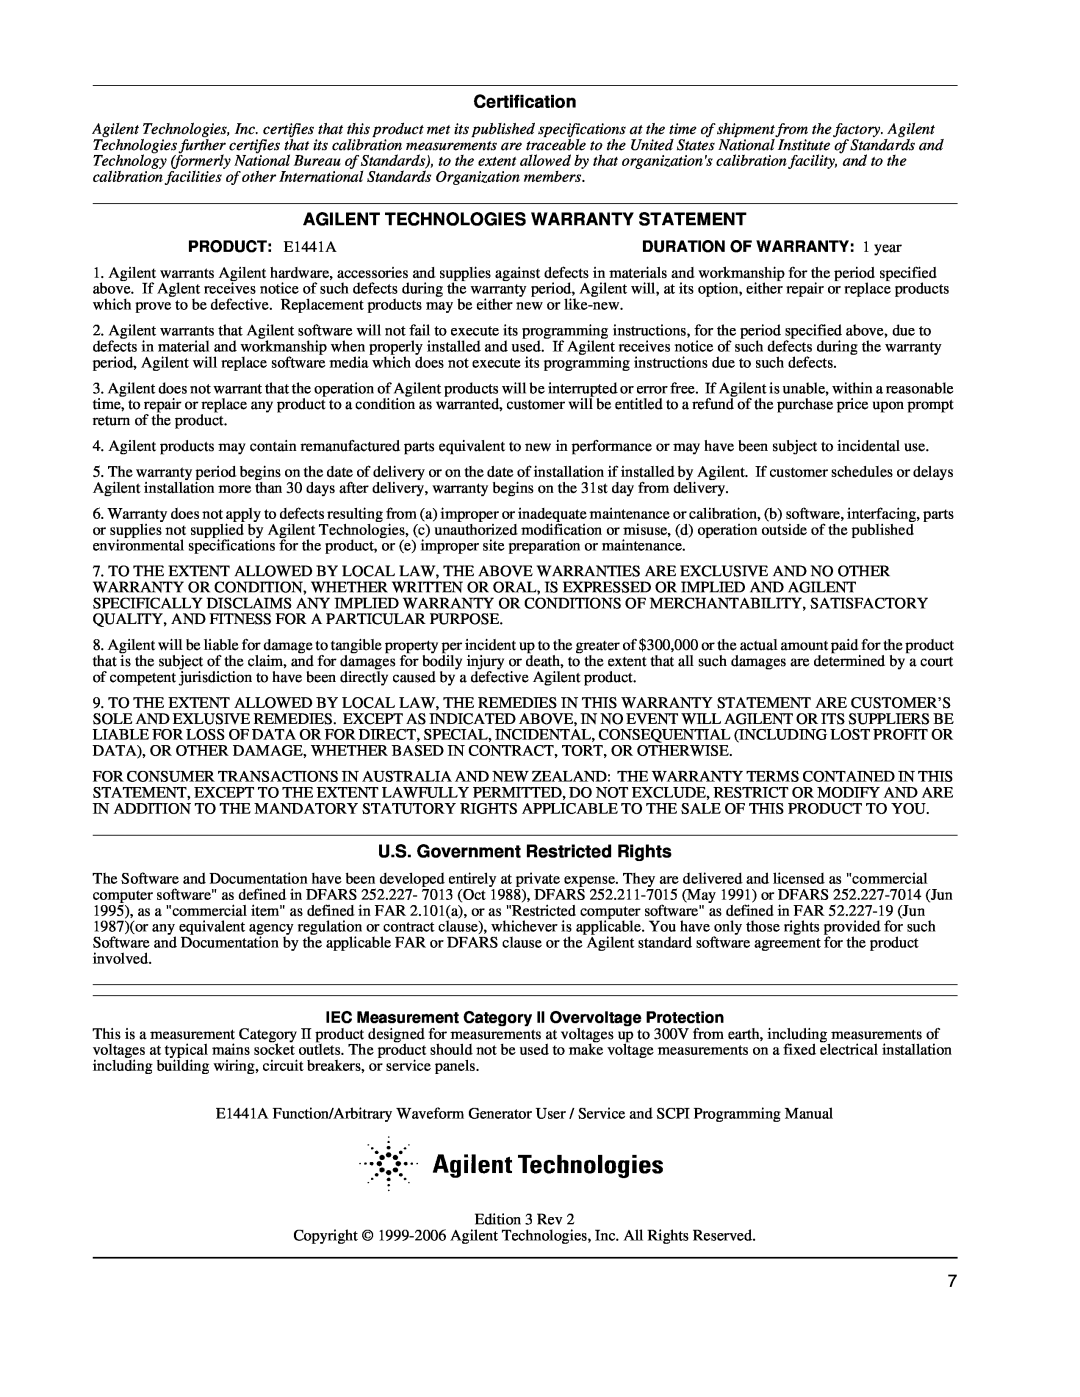 Agilent Technologies E1441A Certification, Agilent Technologies Warranty Statement, U.S. Government Restricted Rights 